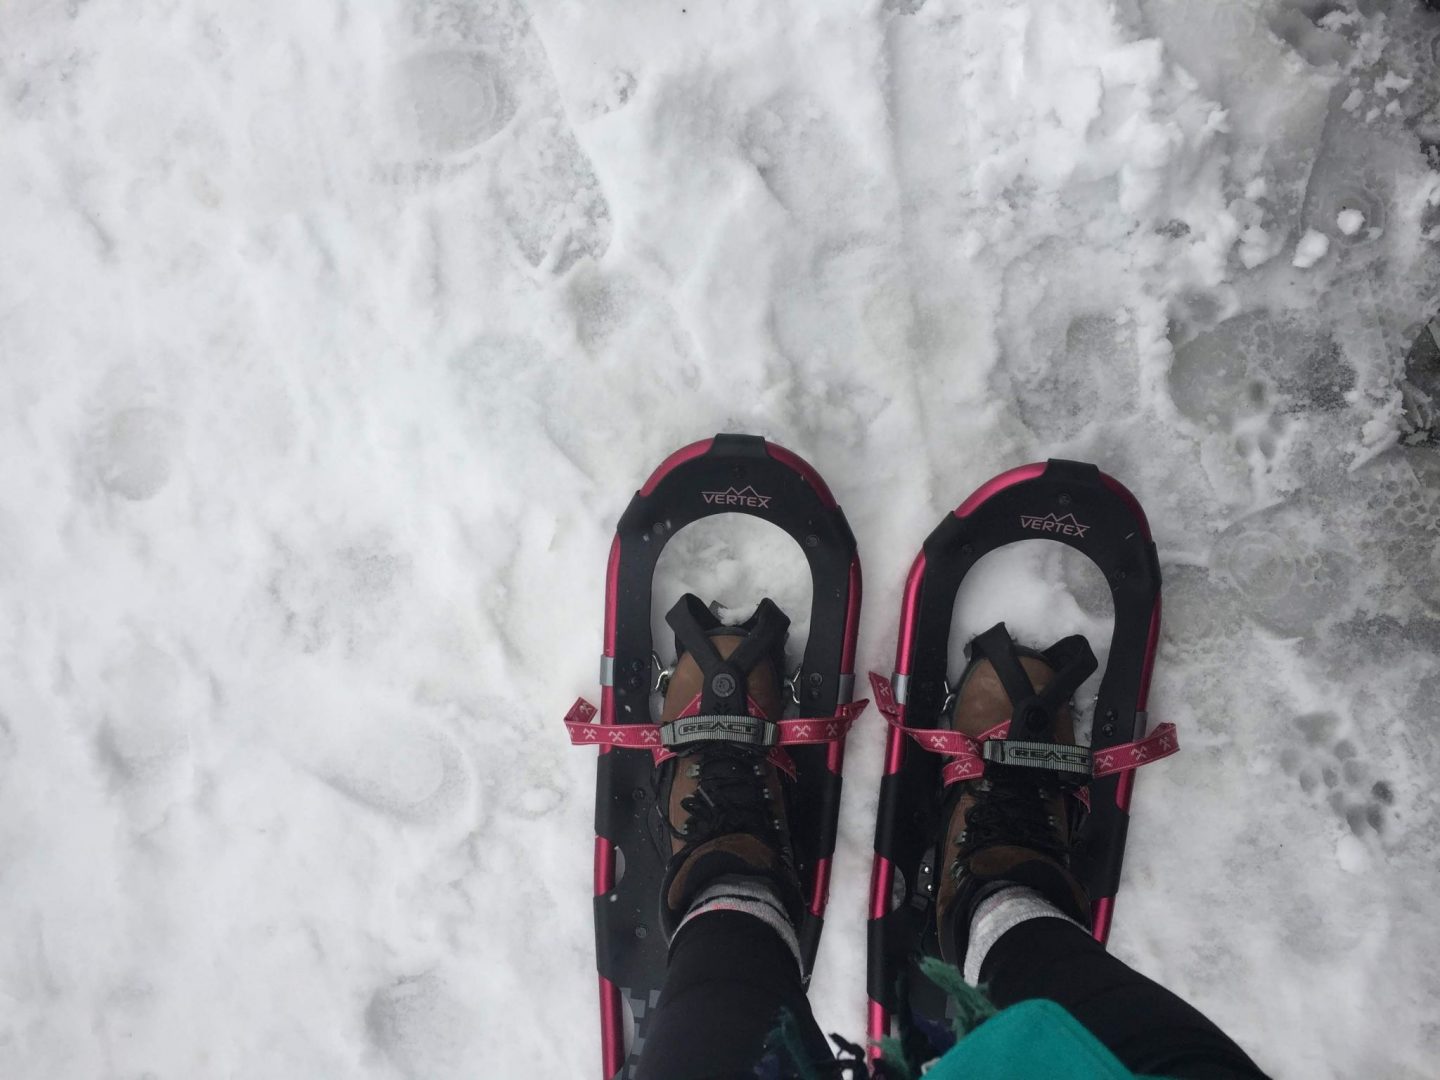 Donning snowshoes on Mount Seymour, Vancouver